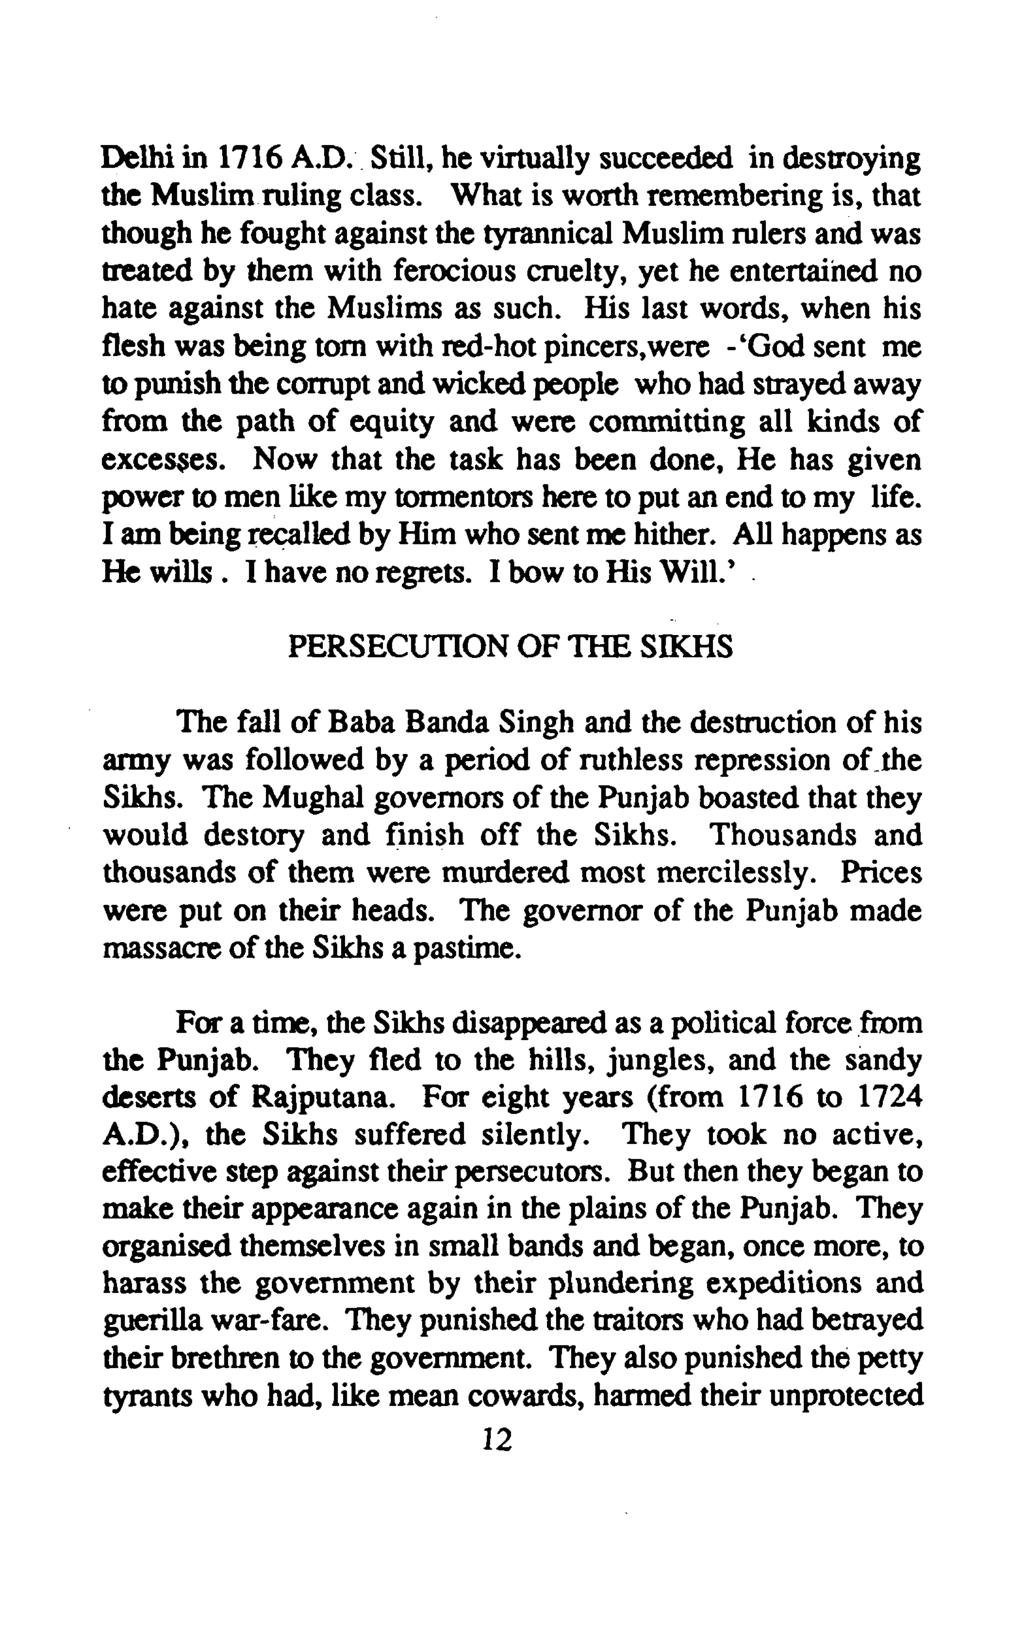 Delhi in 1716 A.D.. Still, he virtually succeeded in destroying the Muslim ruling class.